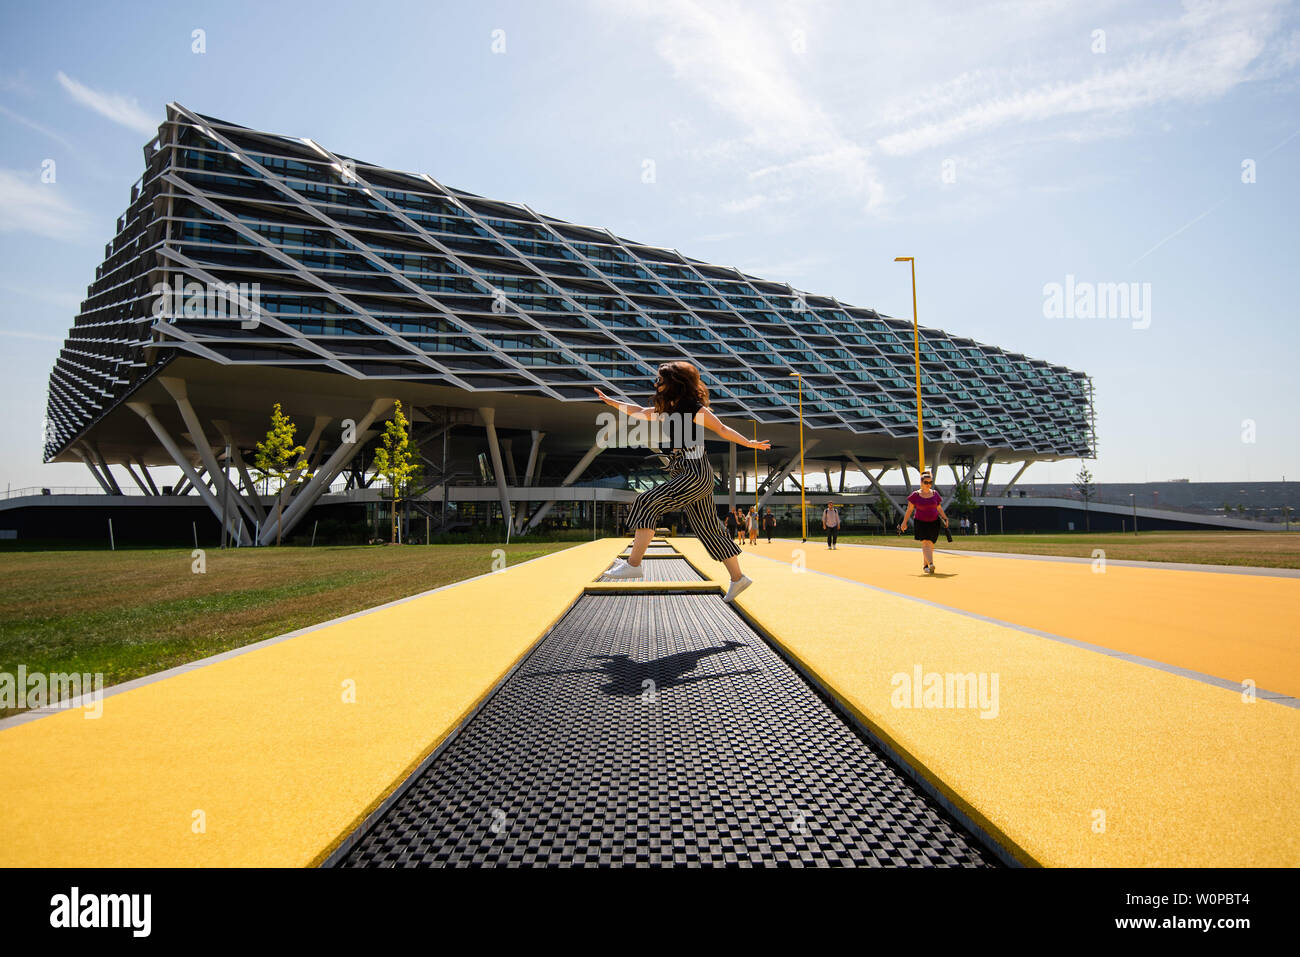 Herzogenaurach, Germany. 26th June, 2019. The new office building "Arena"  by Adidas. Trampolines for the employees are incorporated in the path. In  the 70th year of its existence, the sporting goods manufacturer